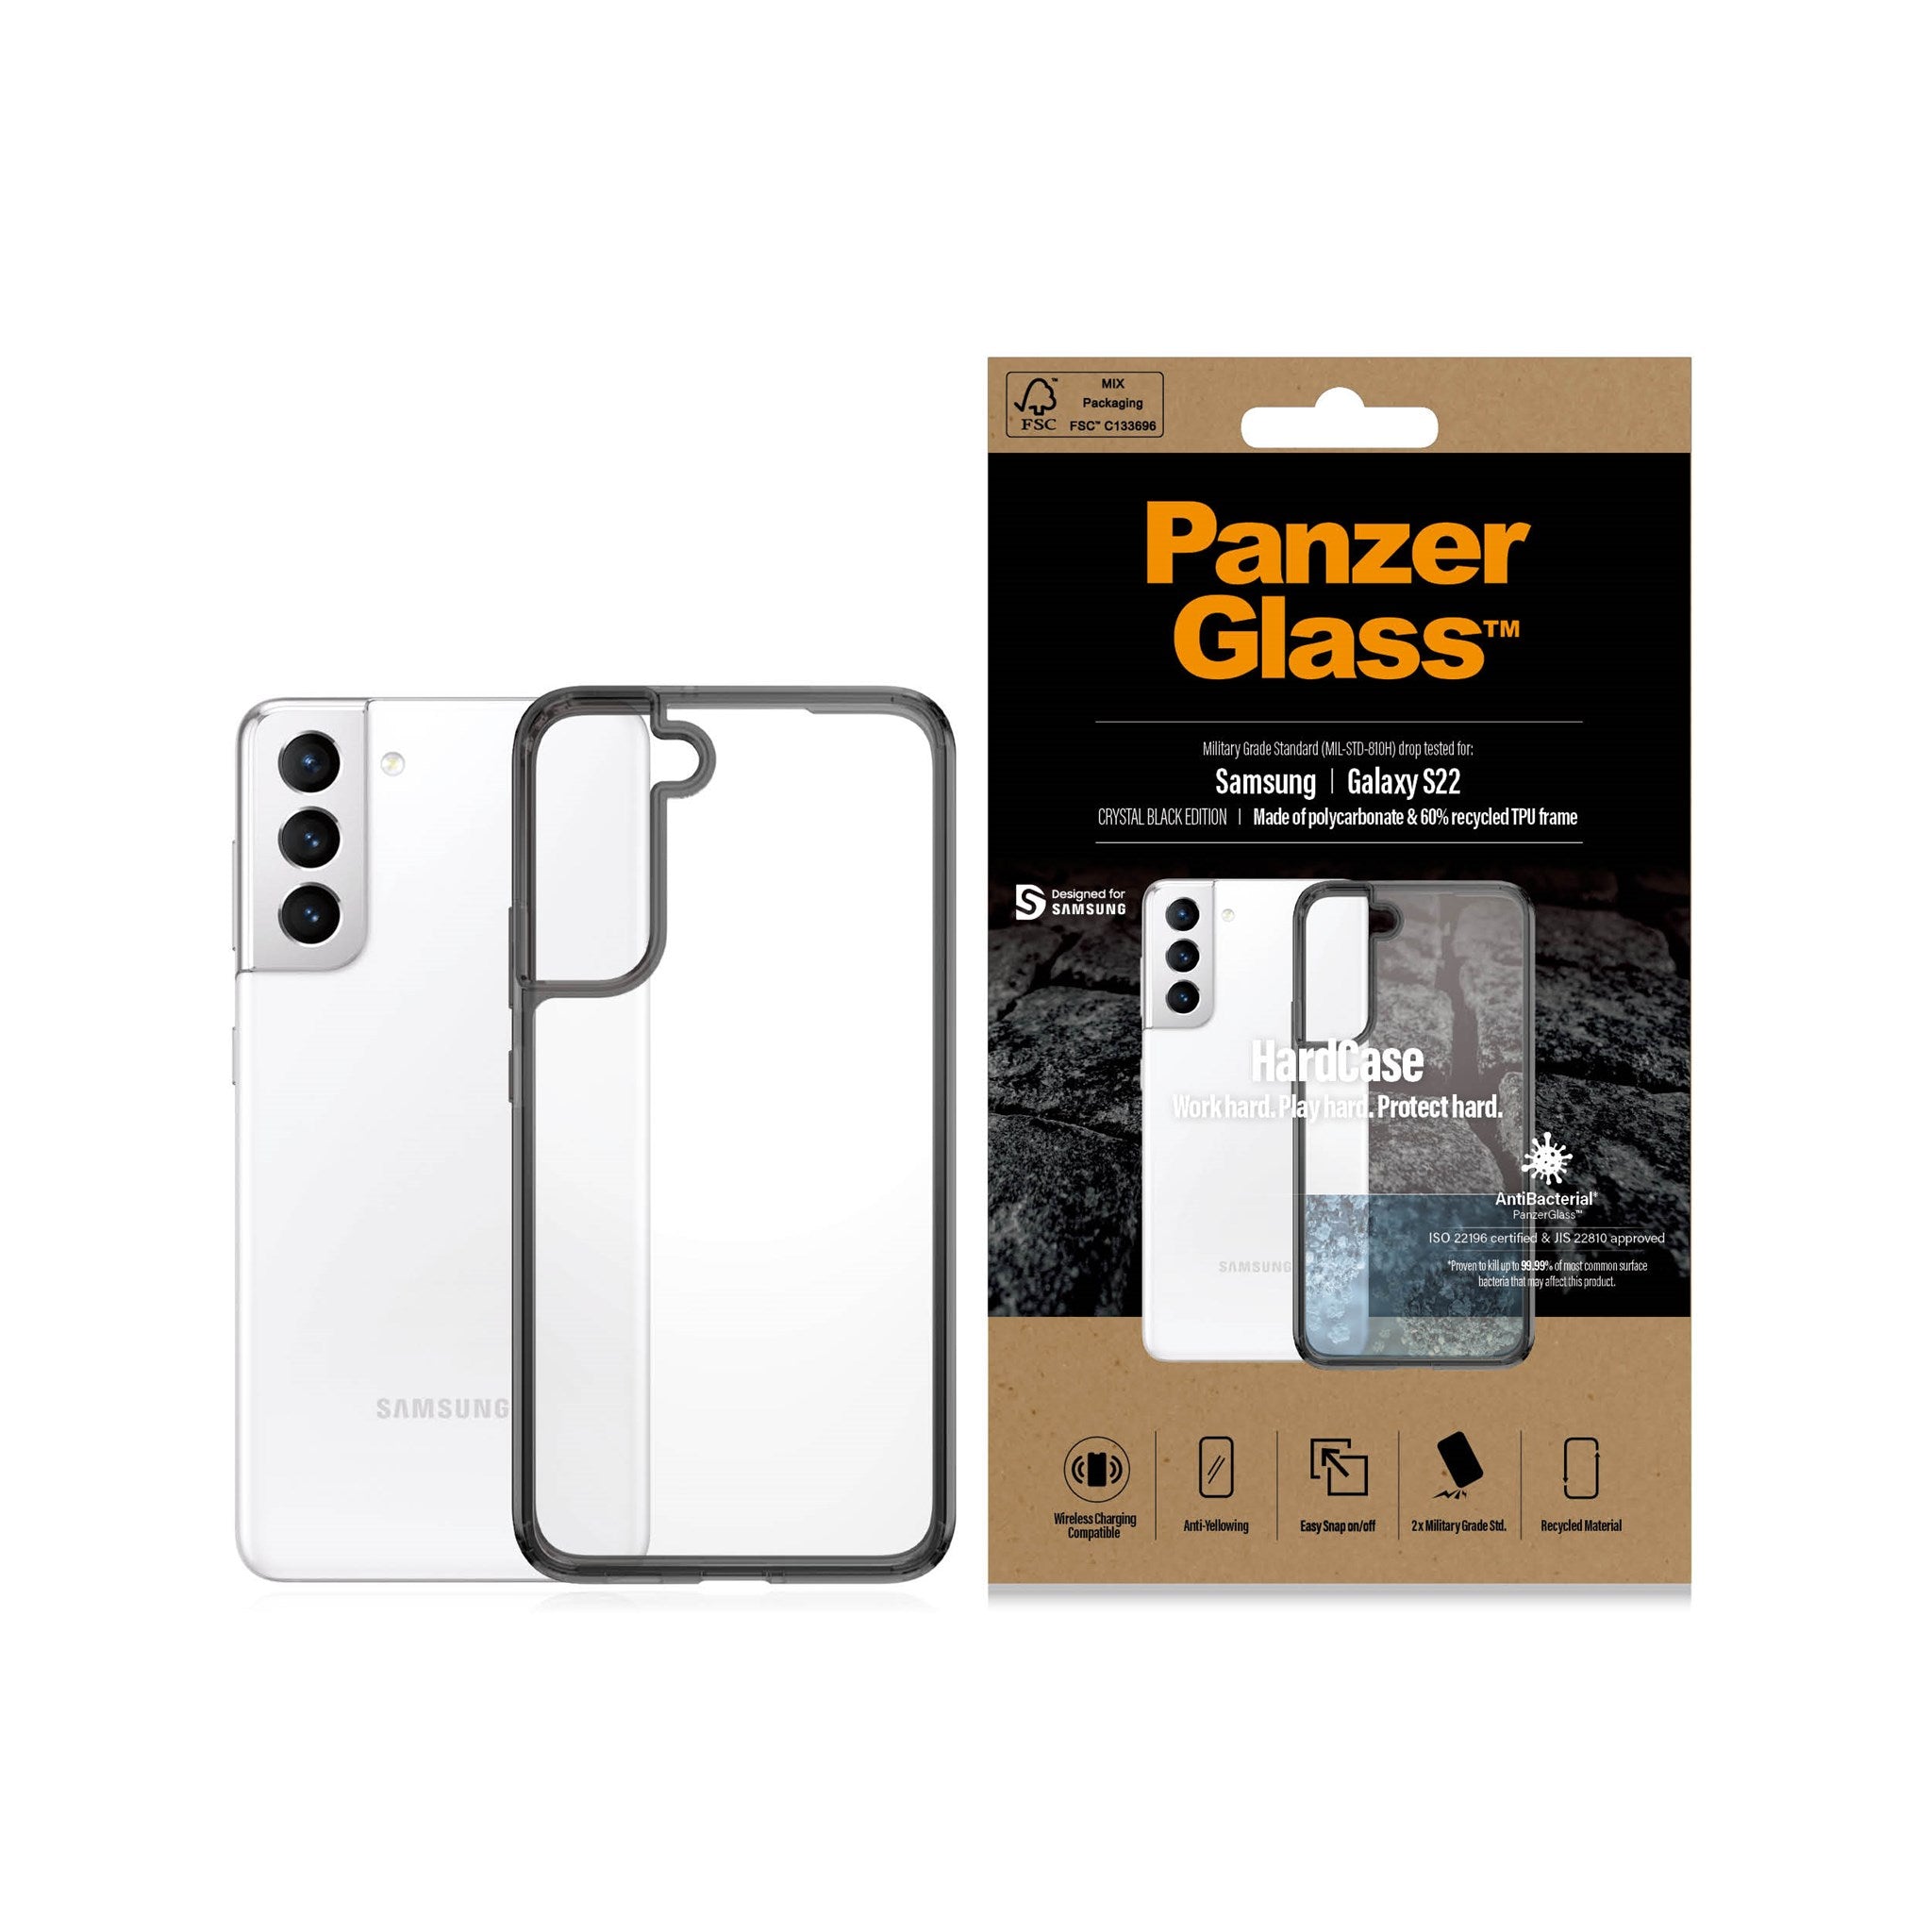 PanzerGlass Samsung Galaxy S22 Ultra 5G Screen Protector (7295) Black- Full  silicone, AntiBacterial, Quick and accurate fingerprint, Scratch resistant